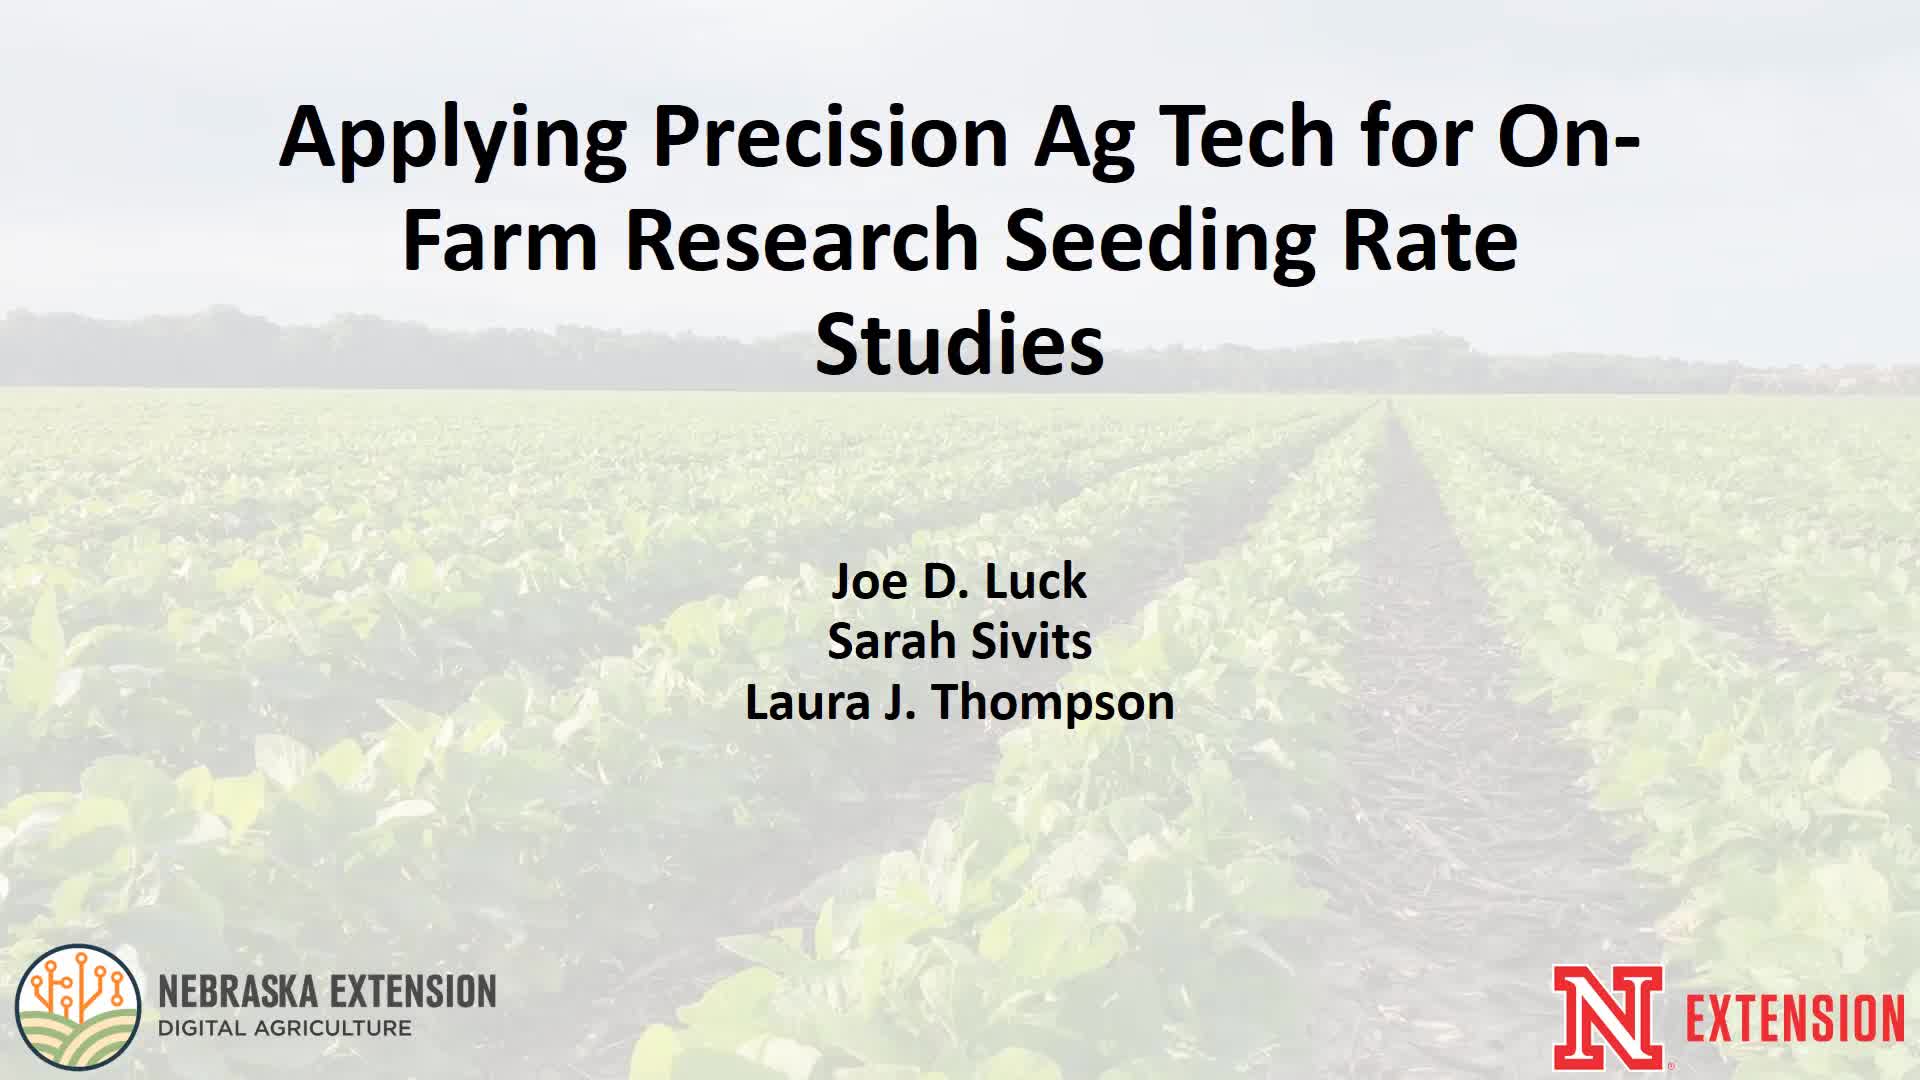 Applying Precision Ag Technologies to enable Variable Rate Soybean Population Studies in Nebraska 